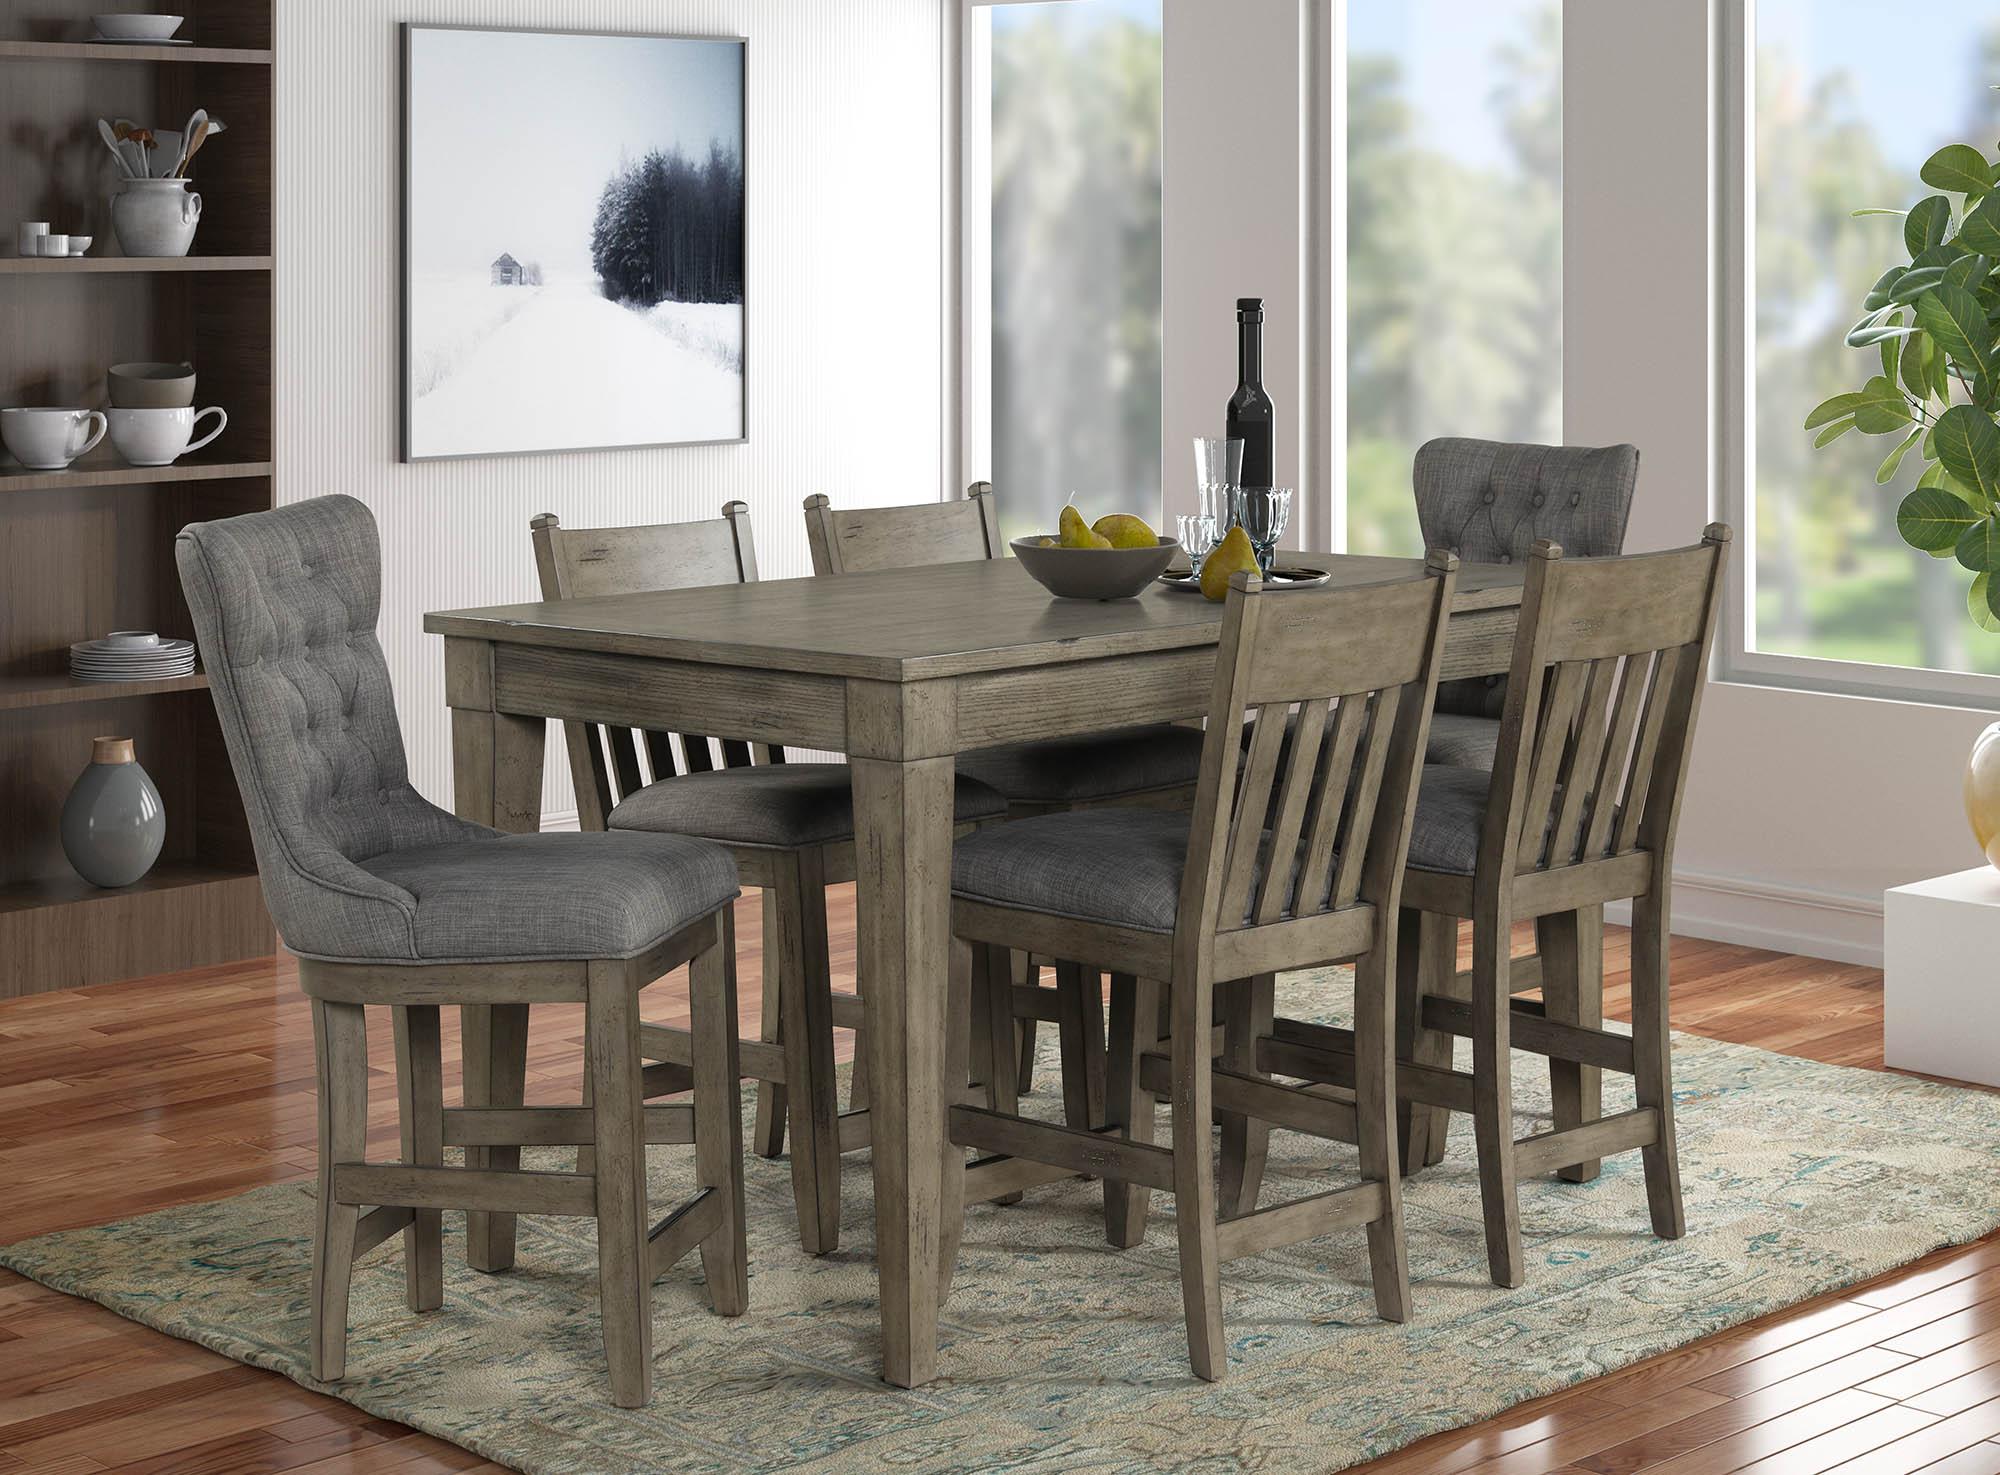 Modern, Transitional Counter Height Table Set HARTFORD 1284-531 1284-531-Set-7 in Rustic Mahogany Fabric